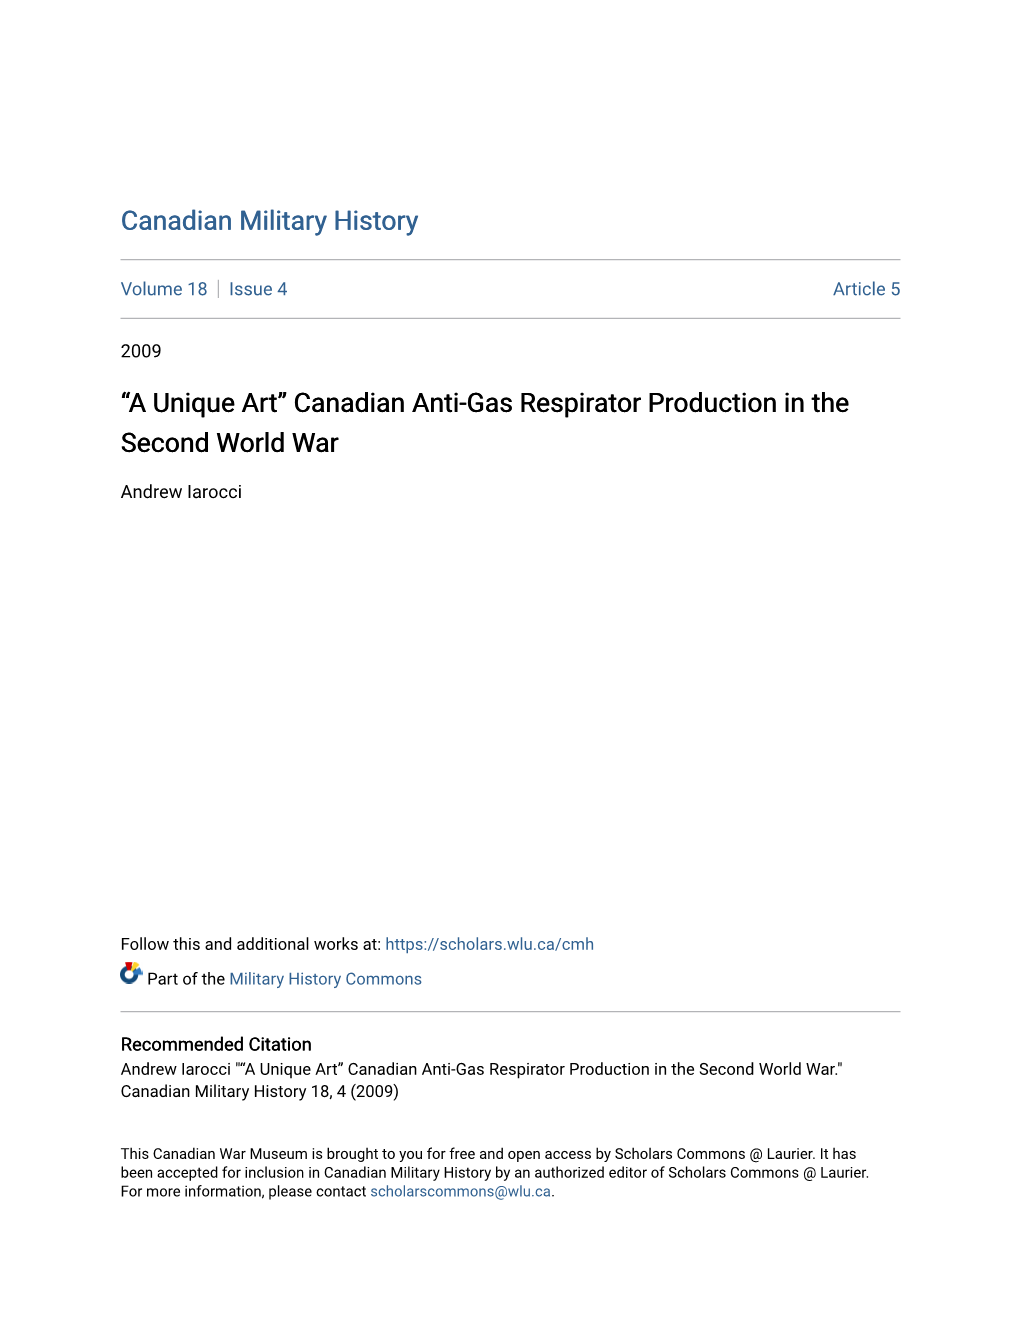 Canadian Anti-Gas Respirator Production in the Second World War